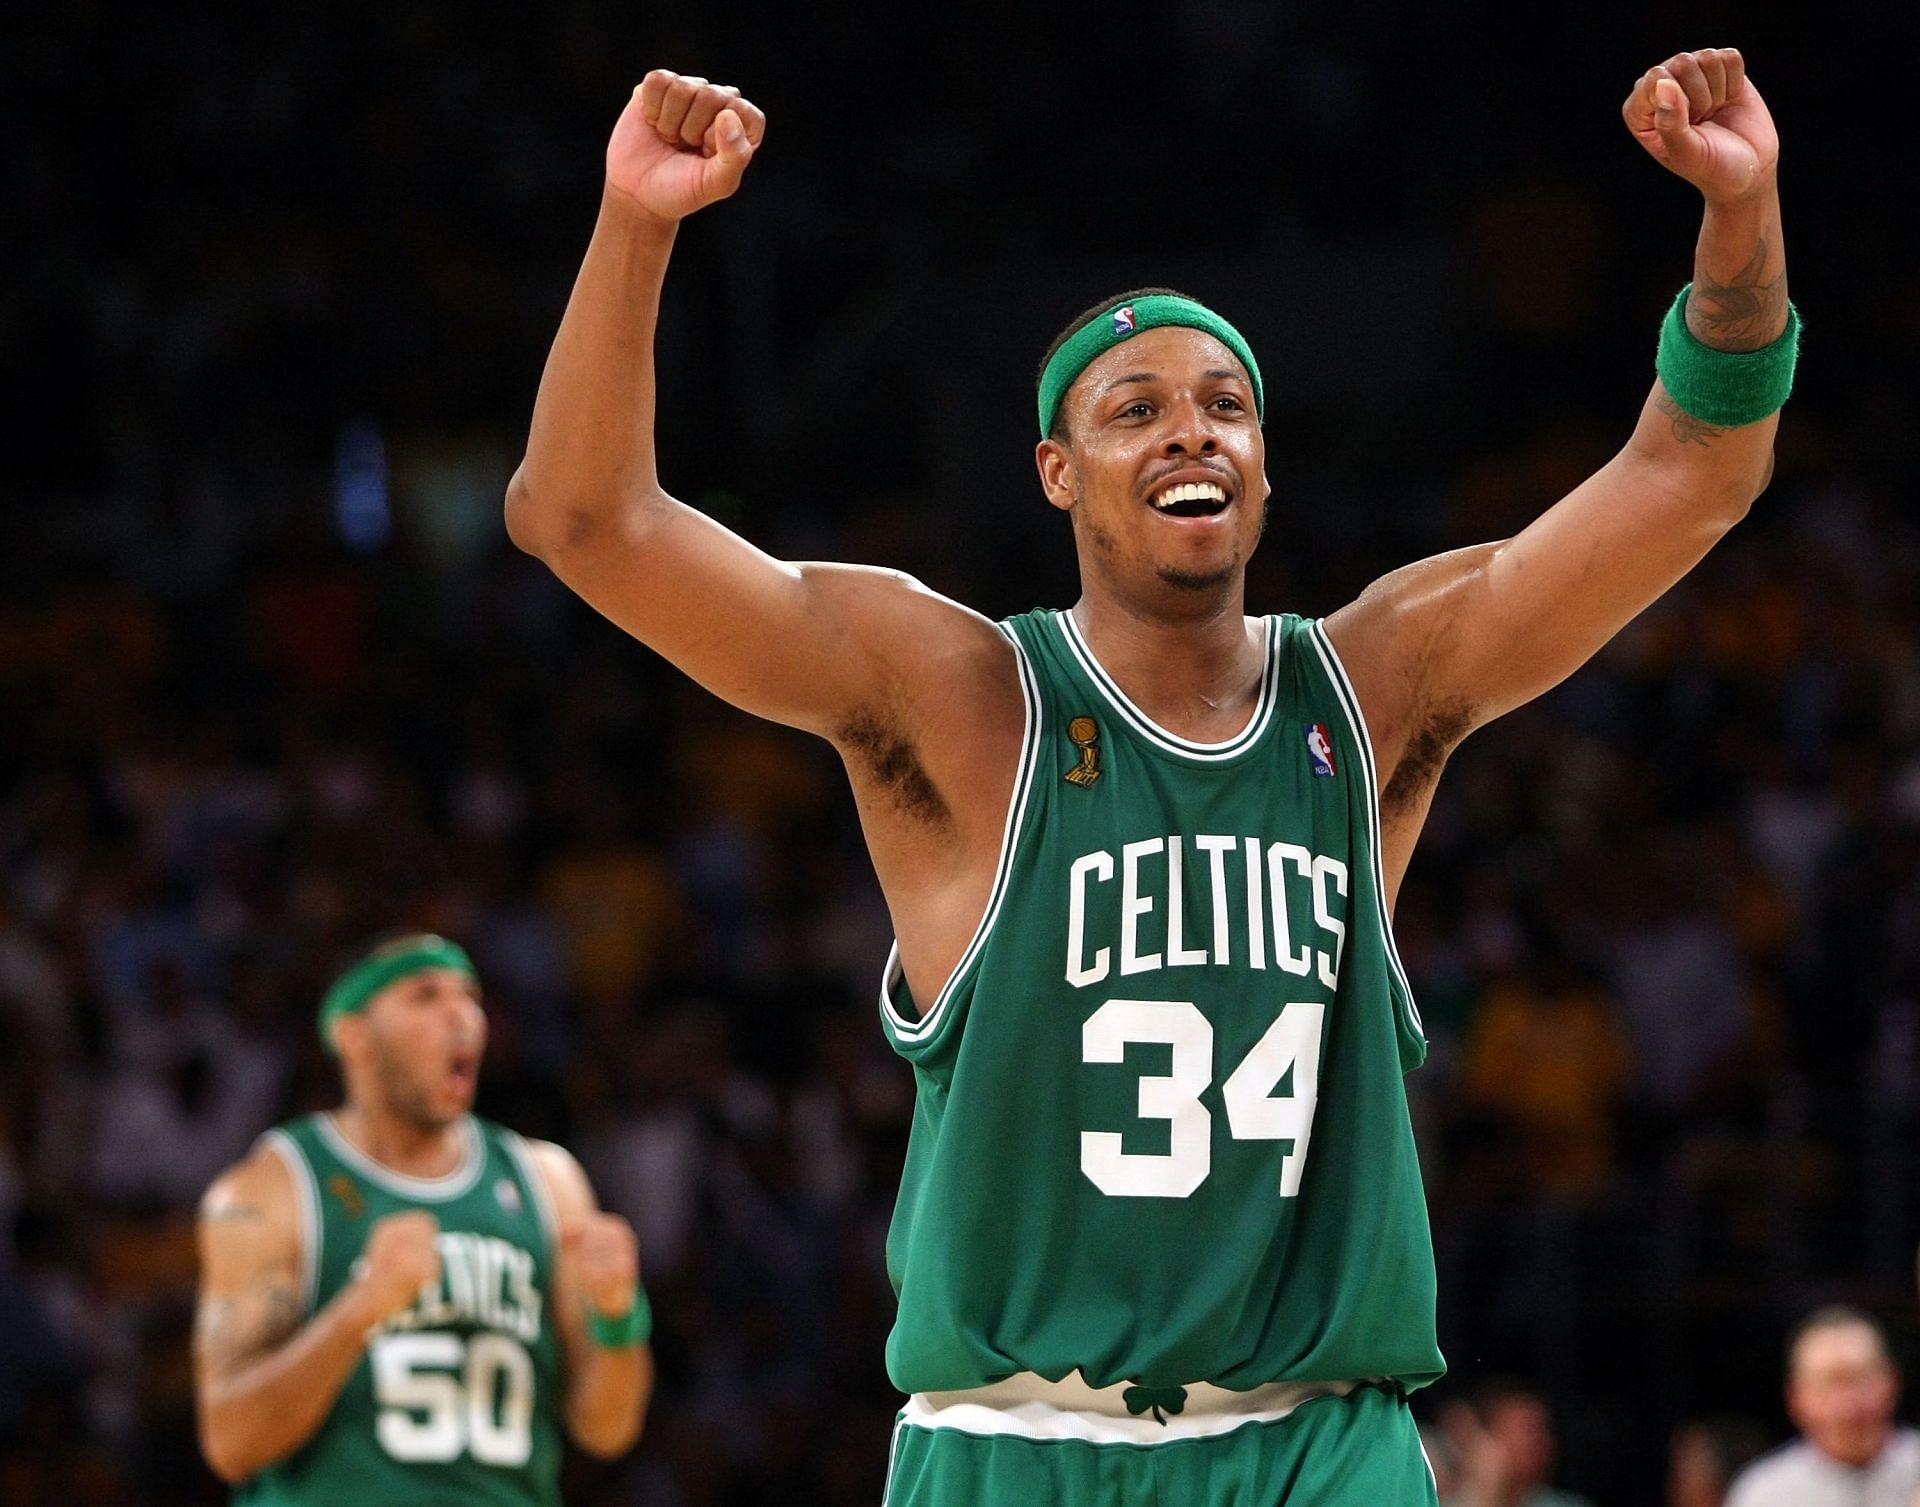 Glen 'Big Baby' Davis leads Celtics to 96-89 victory over Lakers